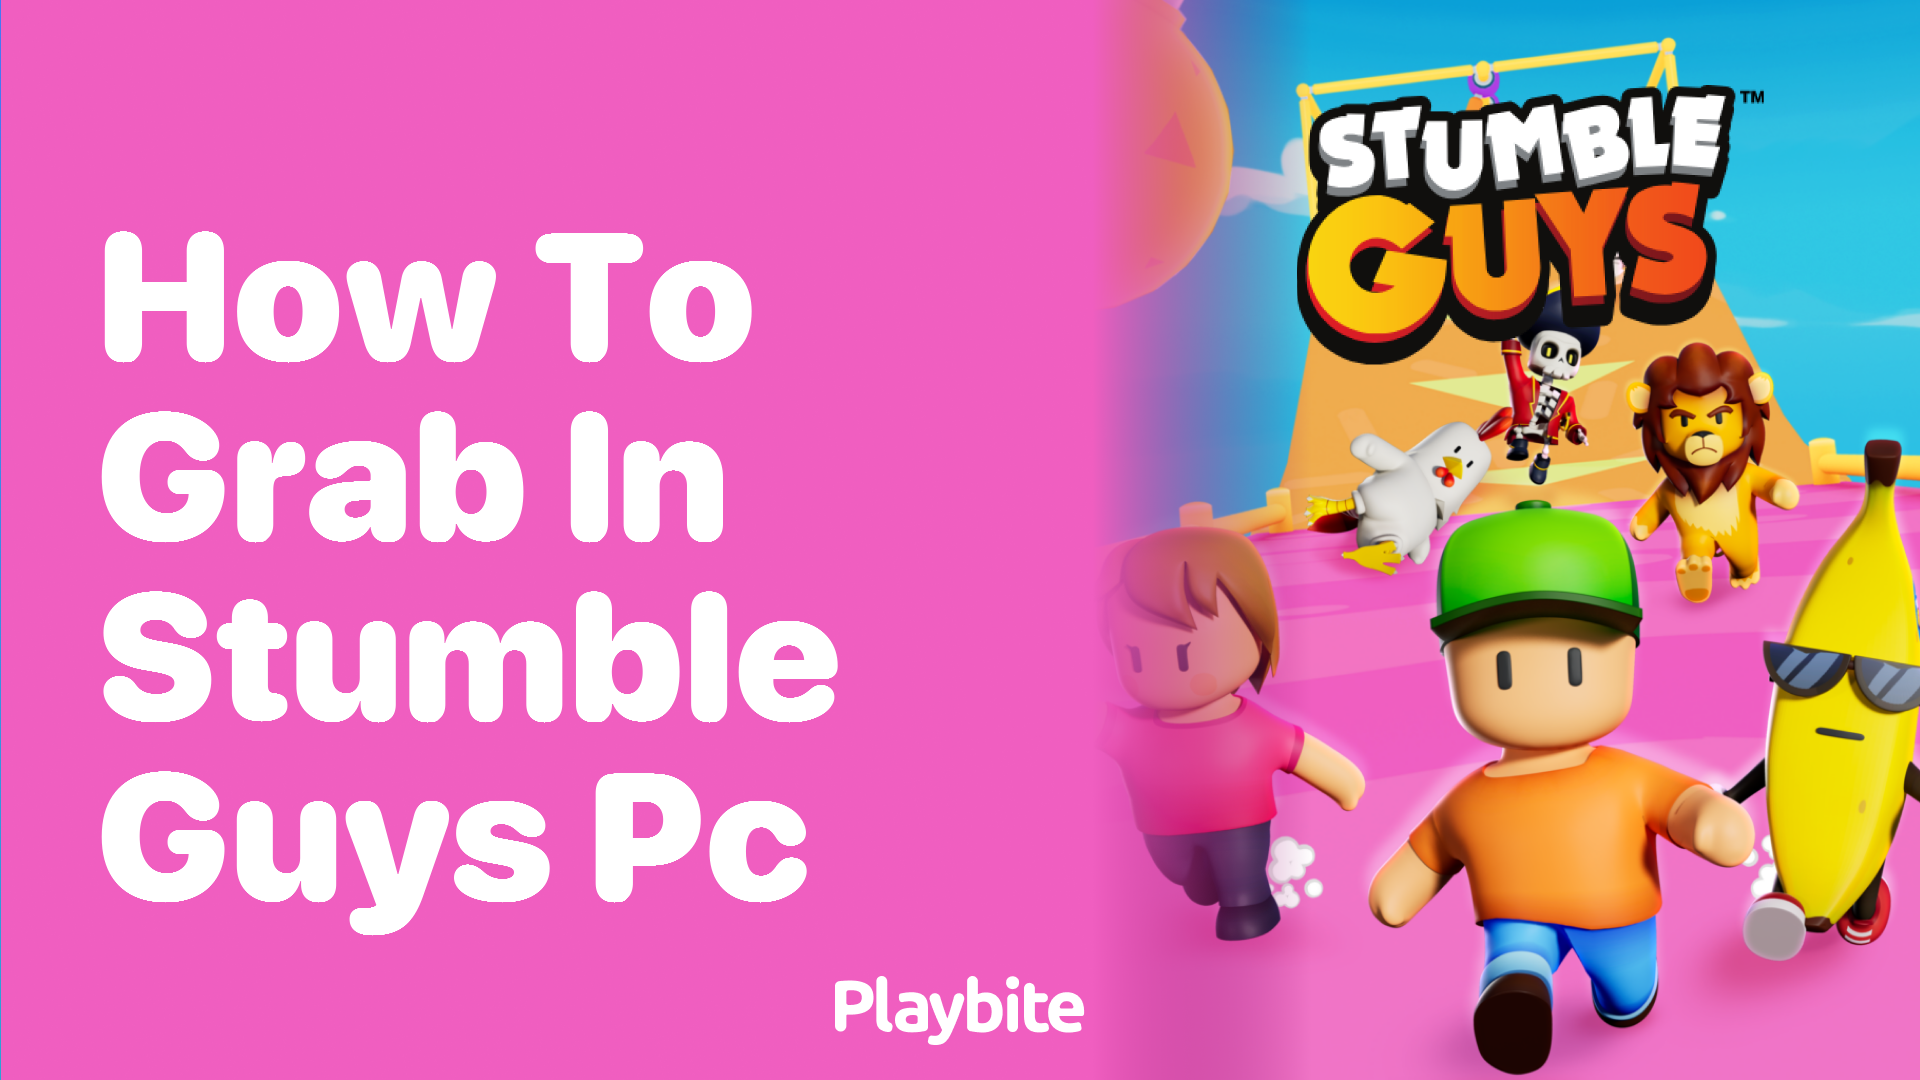 How to Grab in Stumble Guys on PC: A Quick Guide